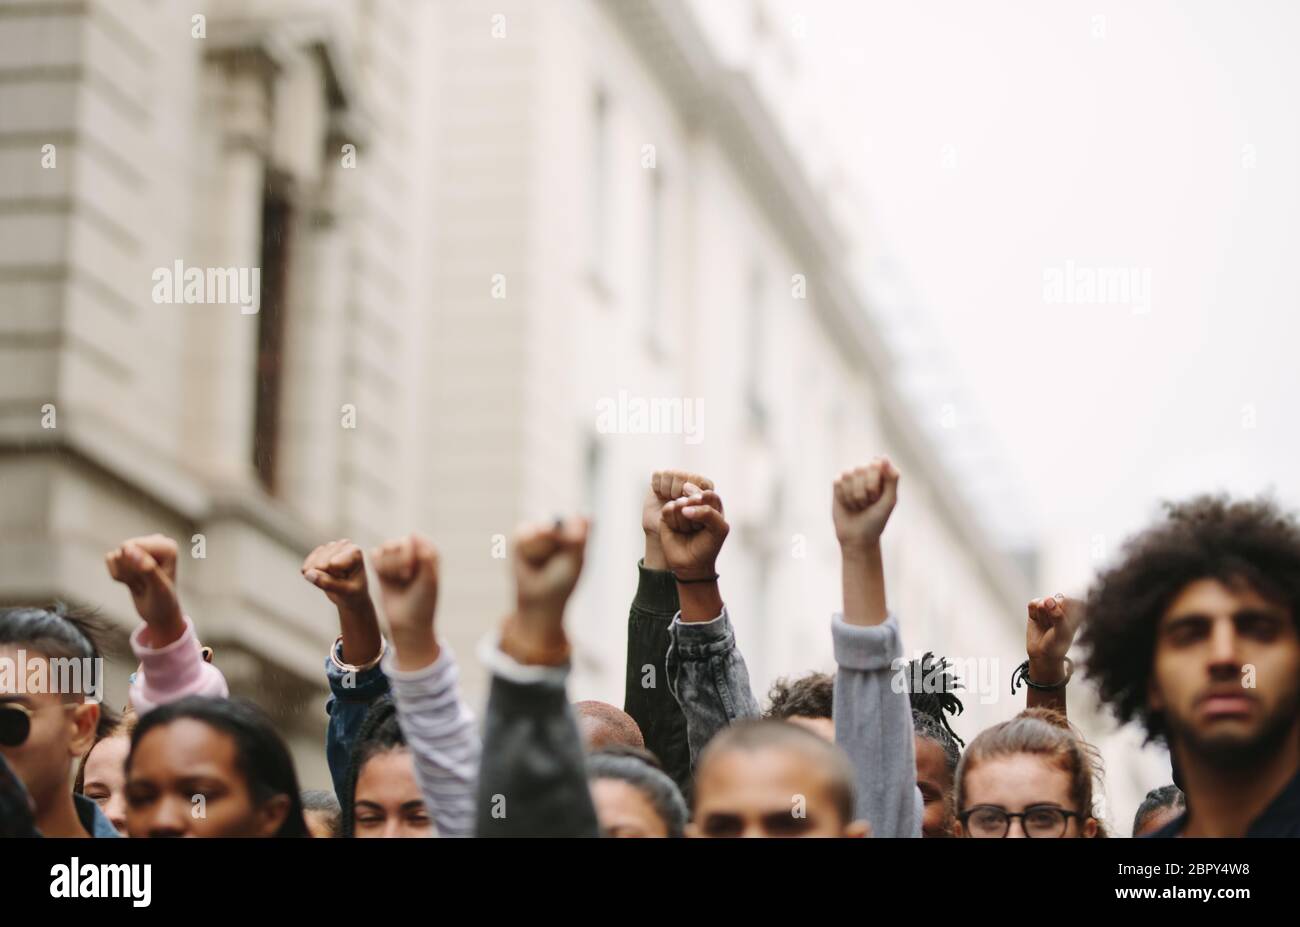 Arms raised in protest. Group of protestors fists raised up in the air. Stock Photo